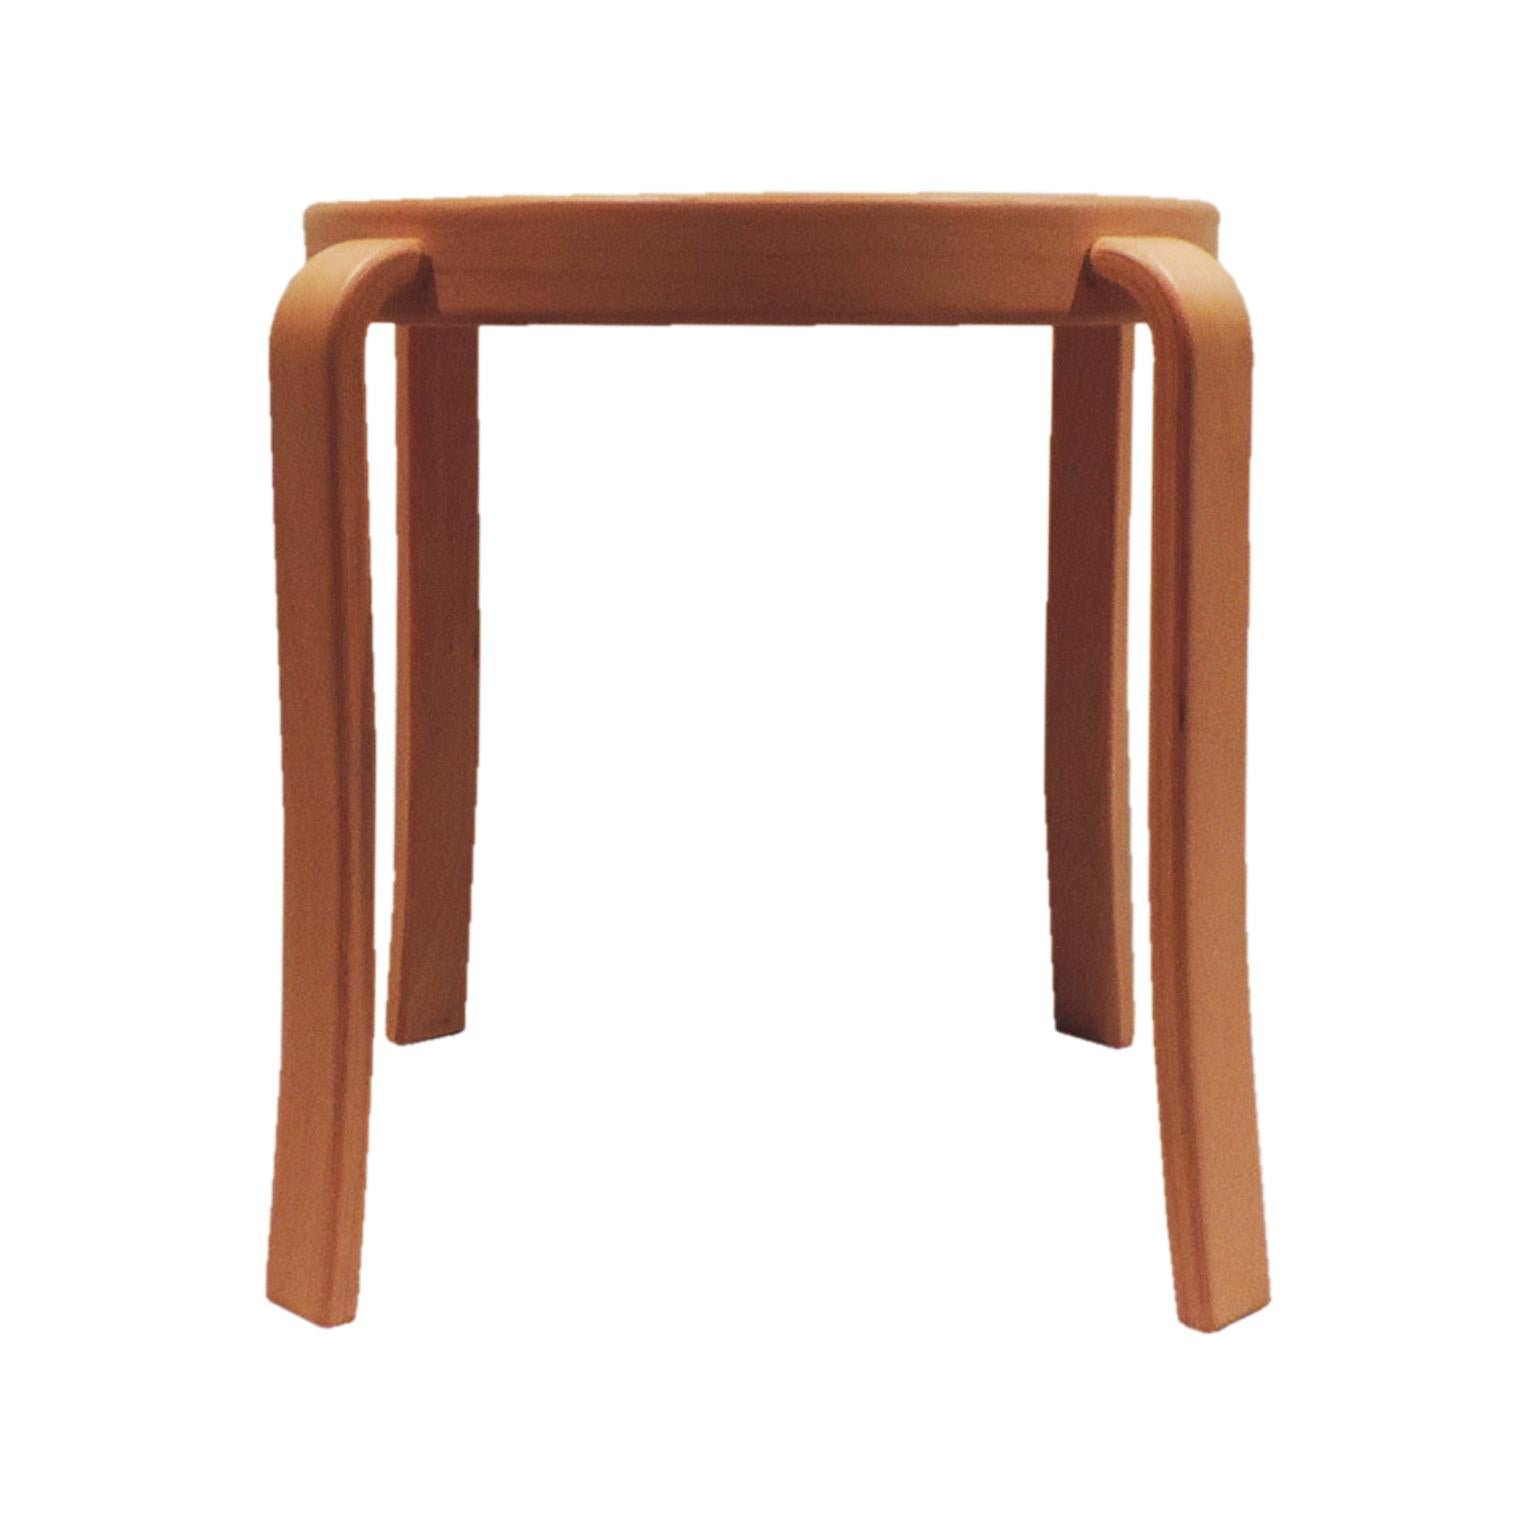 This is a versatile stool which can be used as a side table or a seat. 

Grey linoleum (anti-microbial properties) inlaid top which is extremely durable. The legs and edge of top is laminated European Beech. 

The 8000 Series is a design icon,